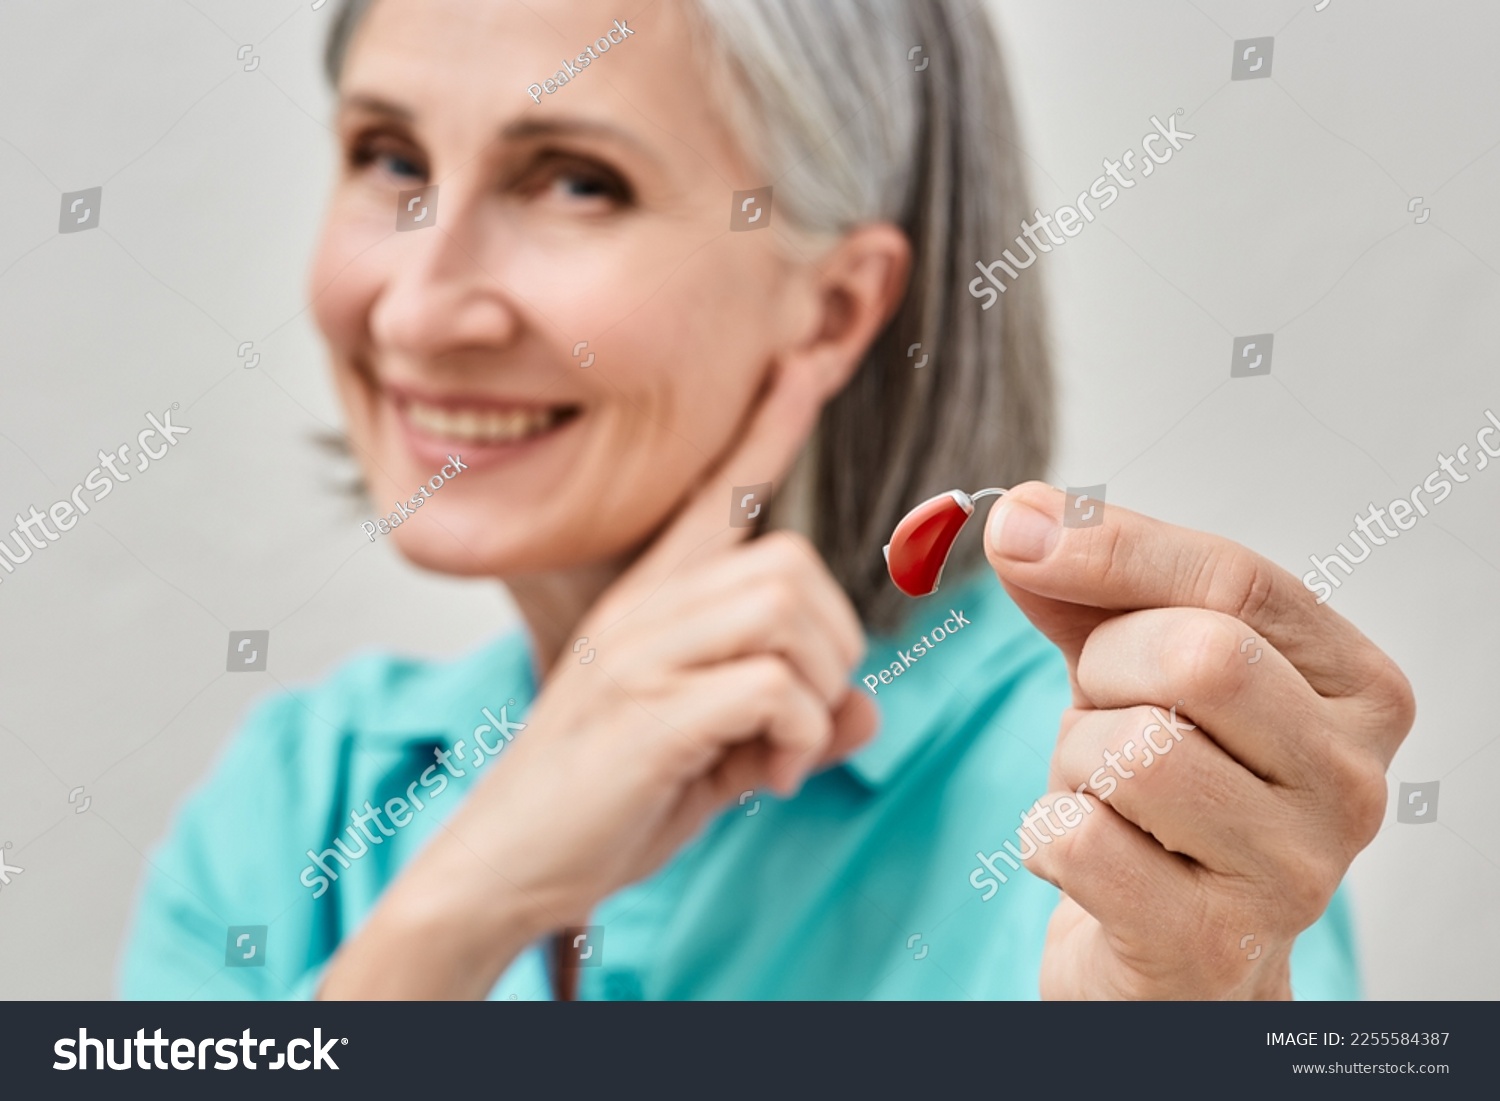 Senior woman holding hearing aid in hand on foreground and pointing finger at her ear, soft focus. Treatment of deafness in people with hearing aids #2255584387